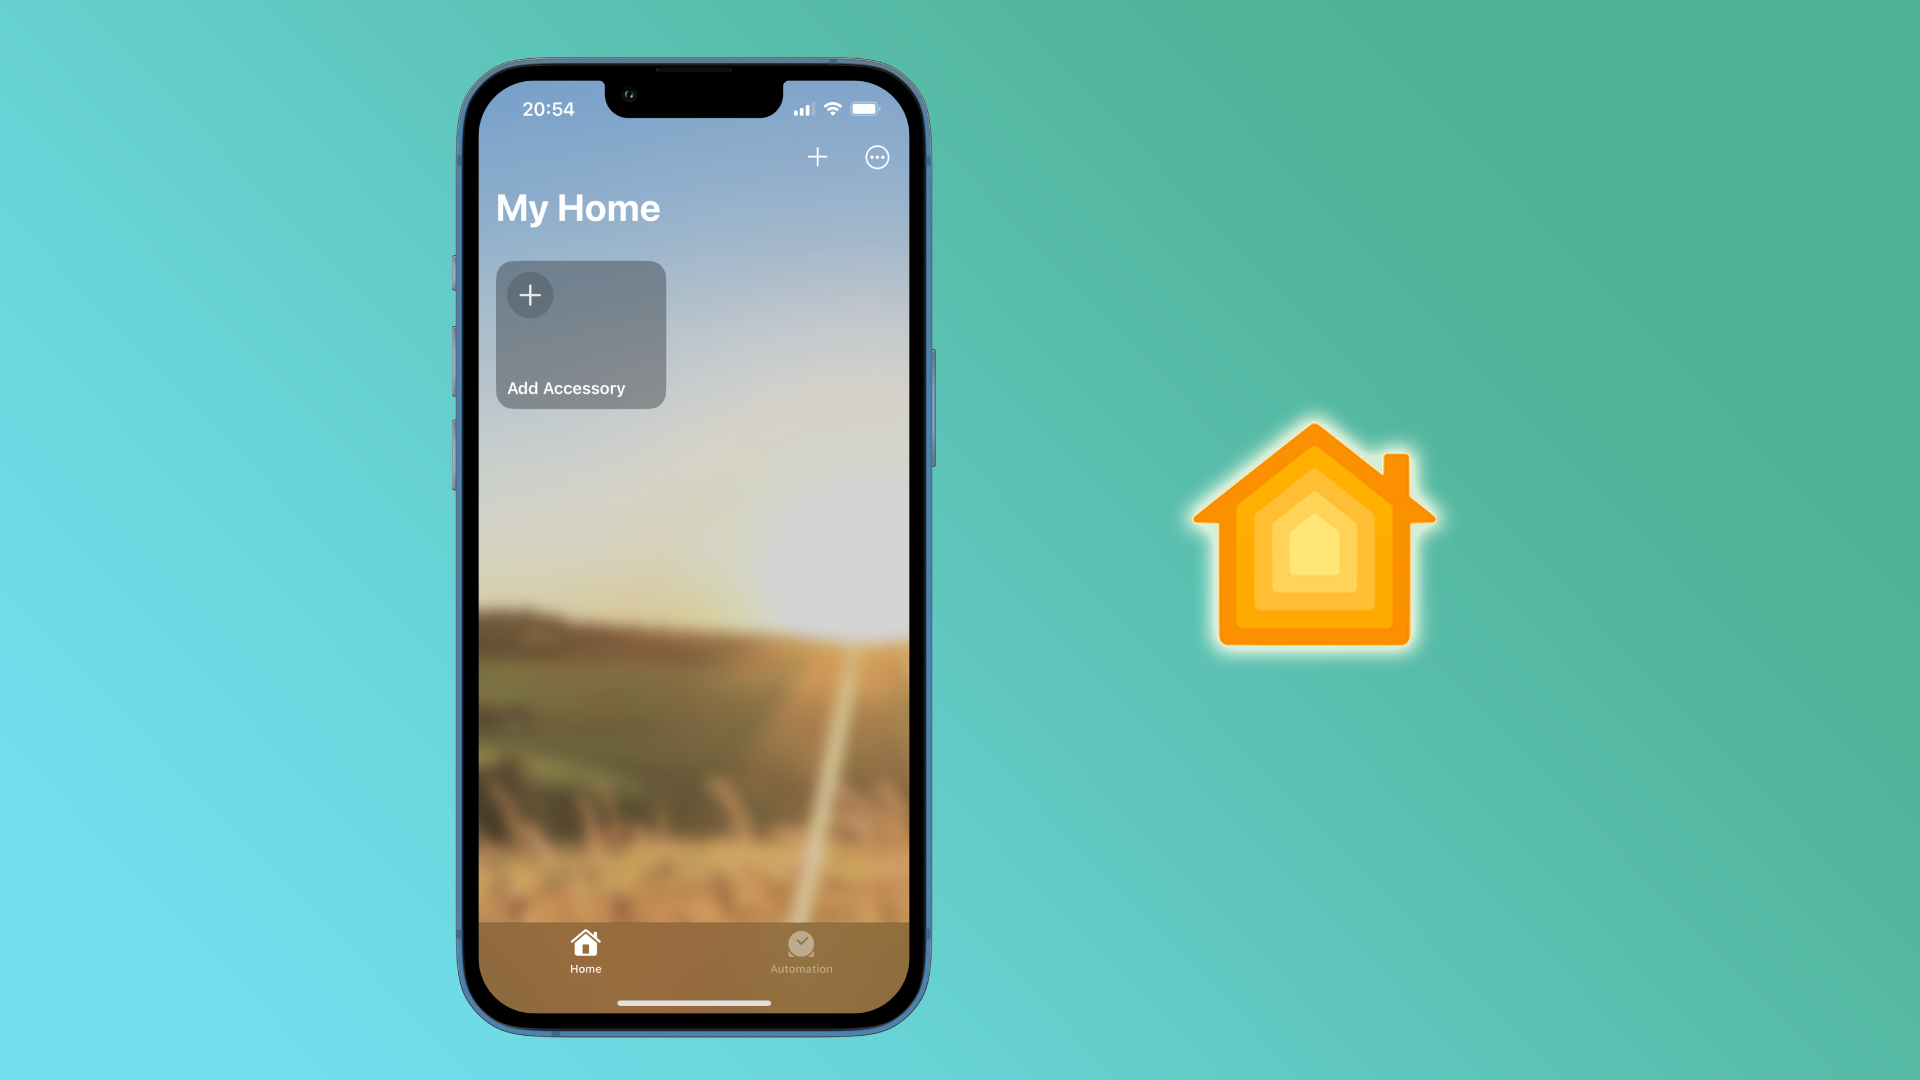 Apple has stopped the Home app upgrade due to issues reported by users